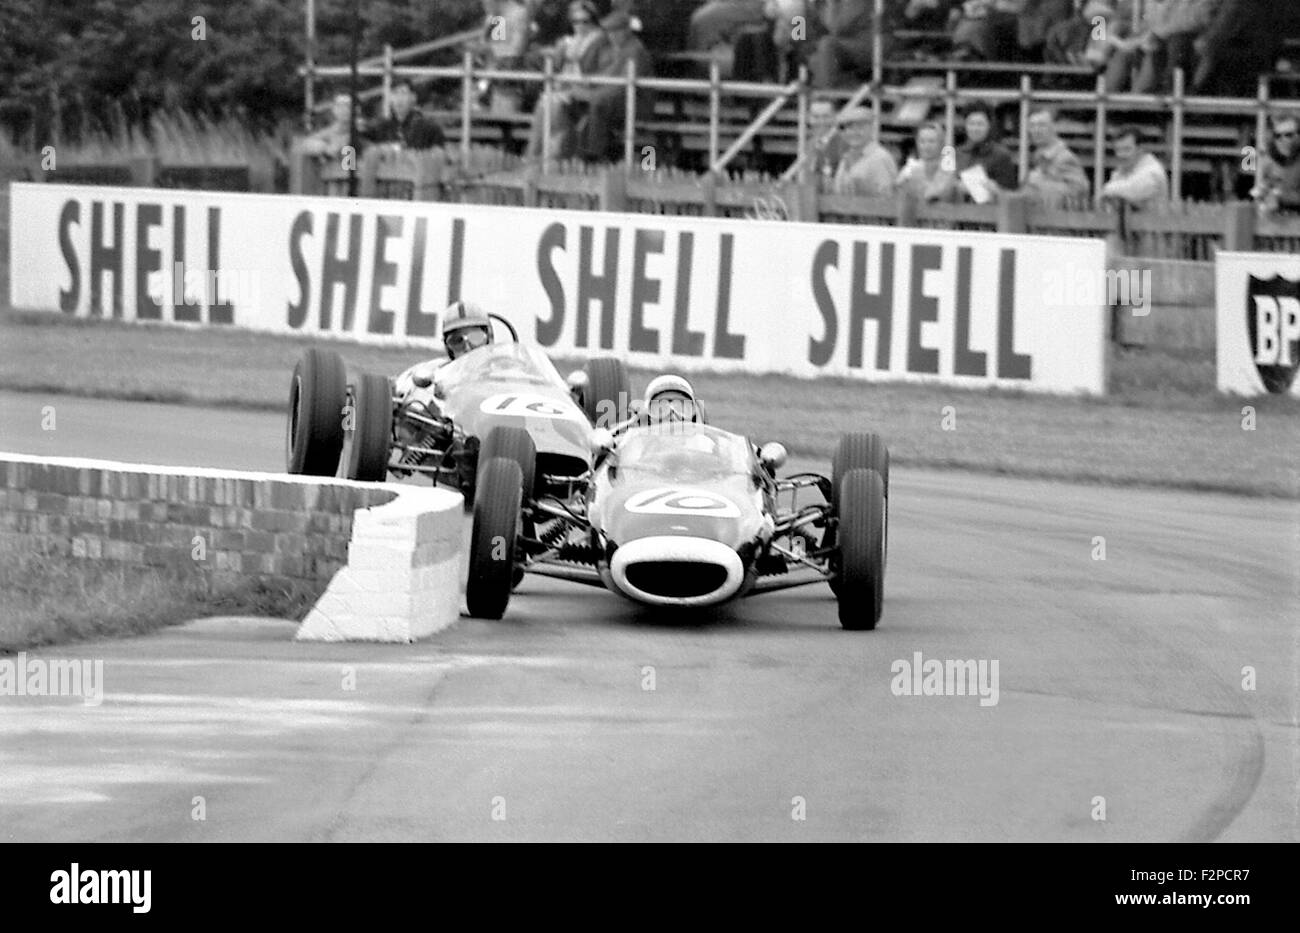 Richard Attwood in a Lola and Frank Gardner in a Brabham in a Formula Junior race Goodwood 1963 Stock Photo